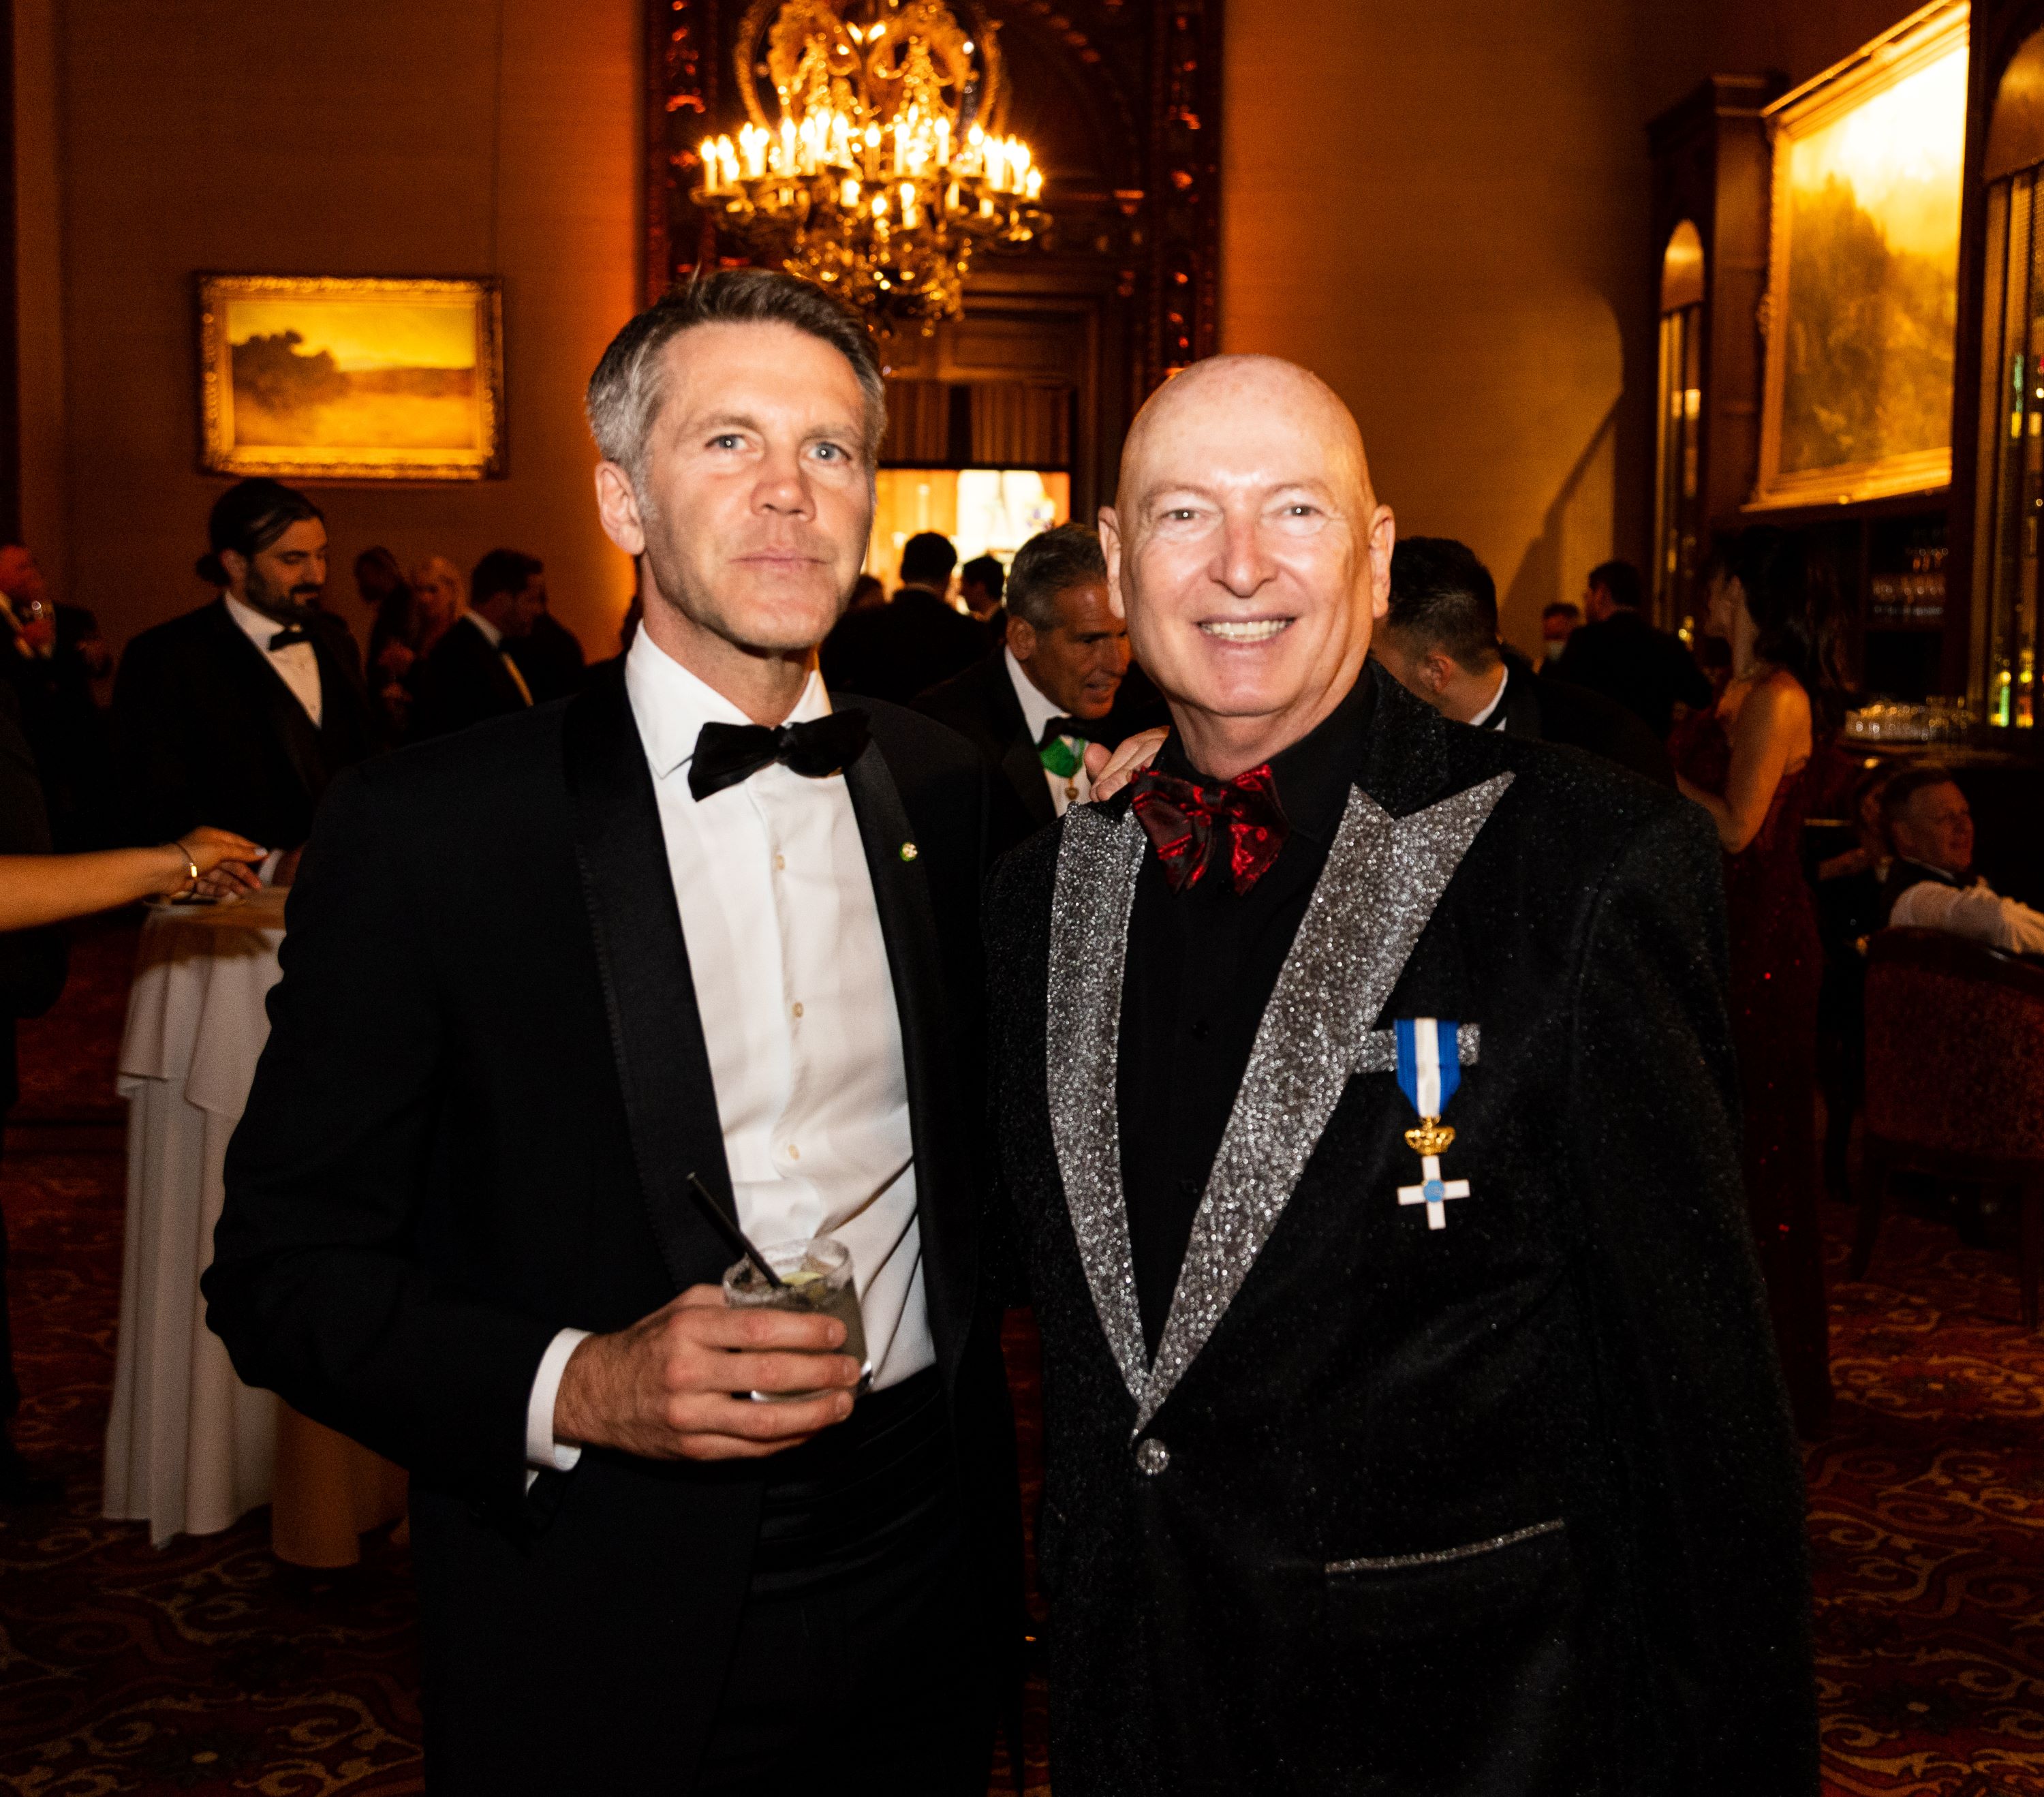 HRH Prince Emmanuel Philibert of Savoy with Chef, Savoy Orders Officer and Founder of Beneficiary Charity Caterina's Club at the fifth Notte di Savoia Los Angeles Gala Reception, April 29, 2023